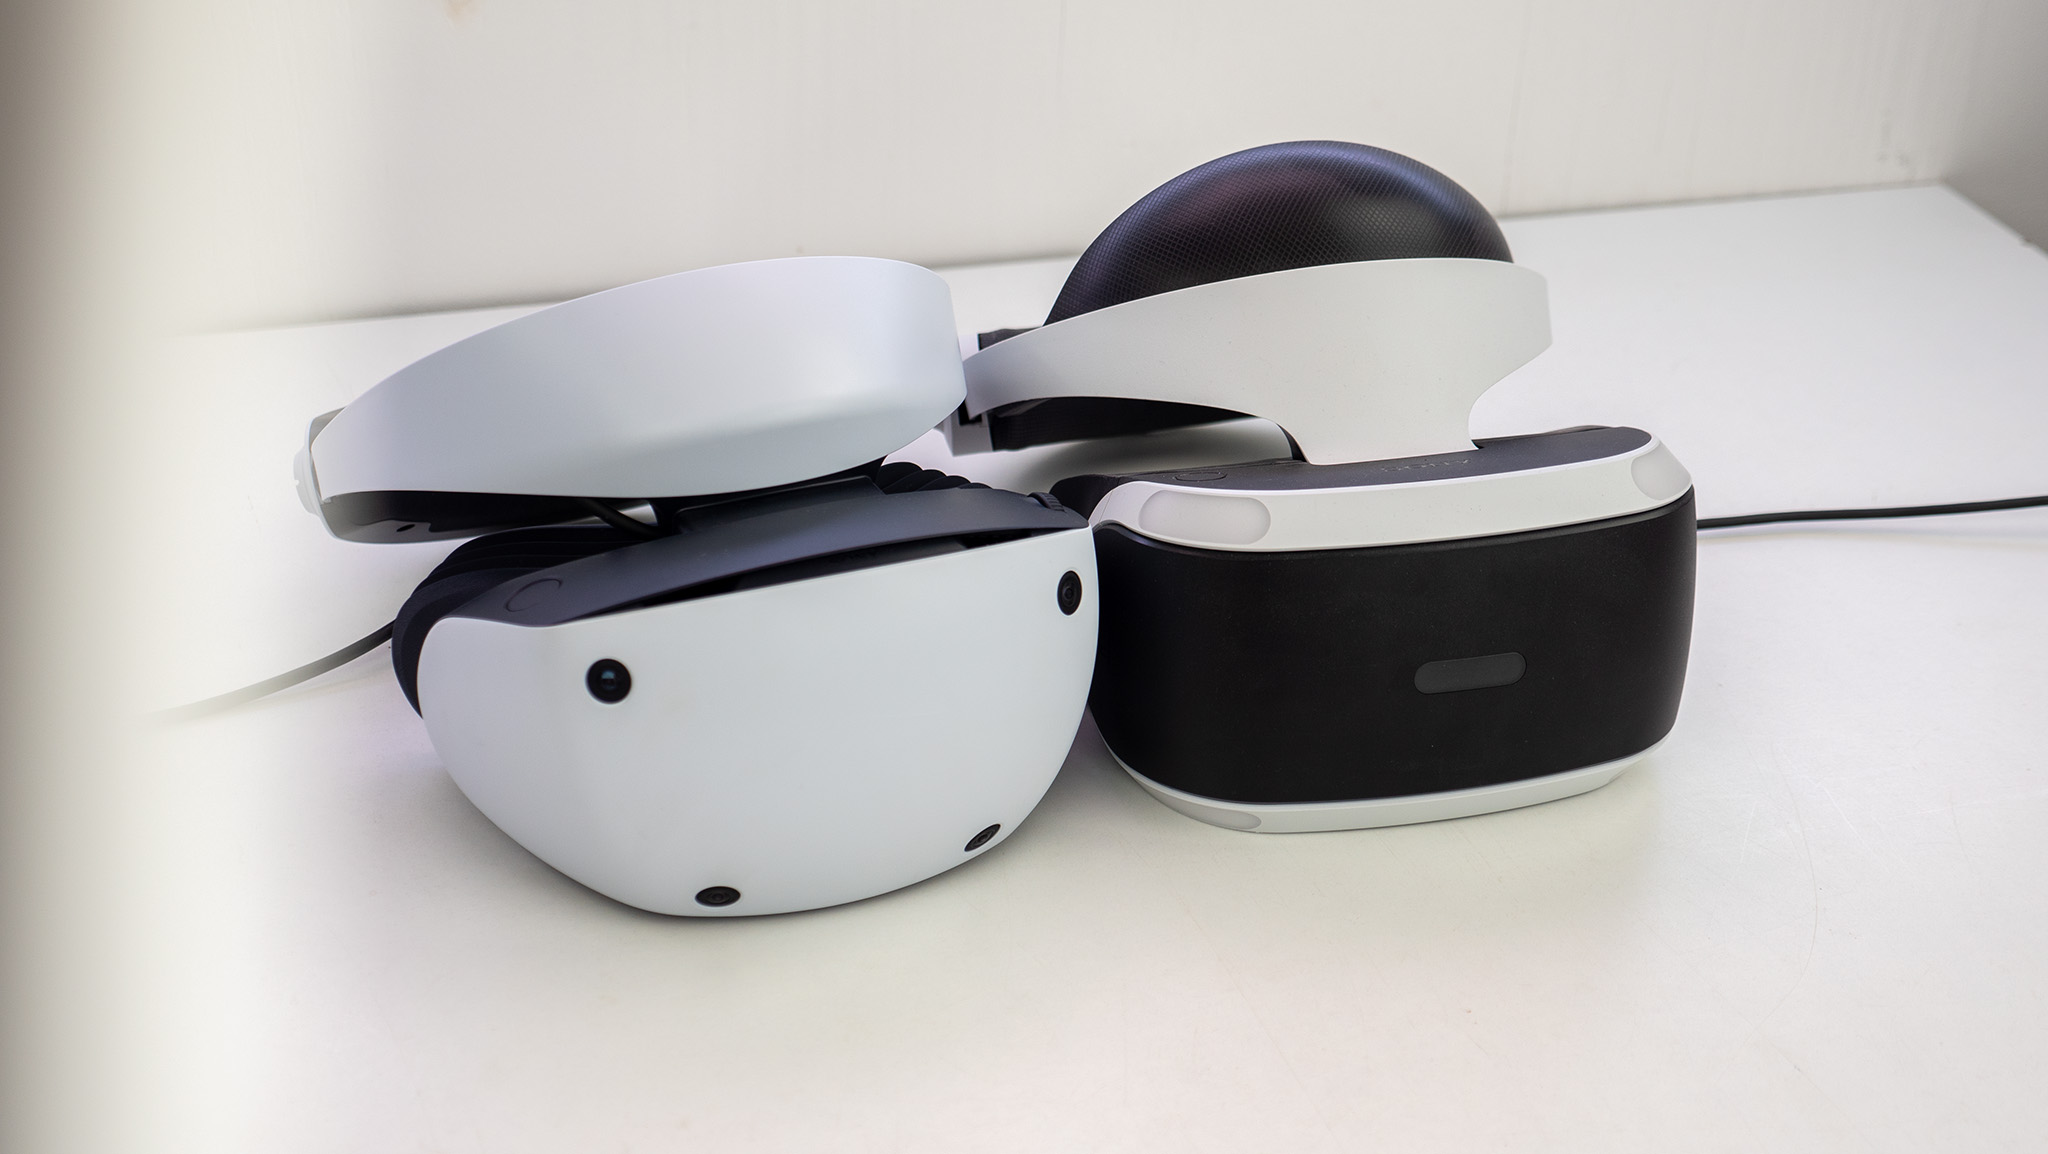 PlayStation VR2 is almost everything I wanted from the next PS VR